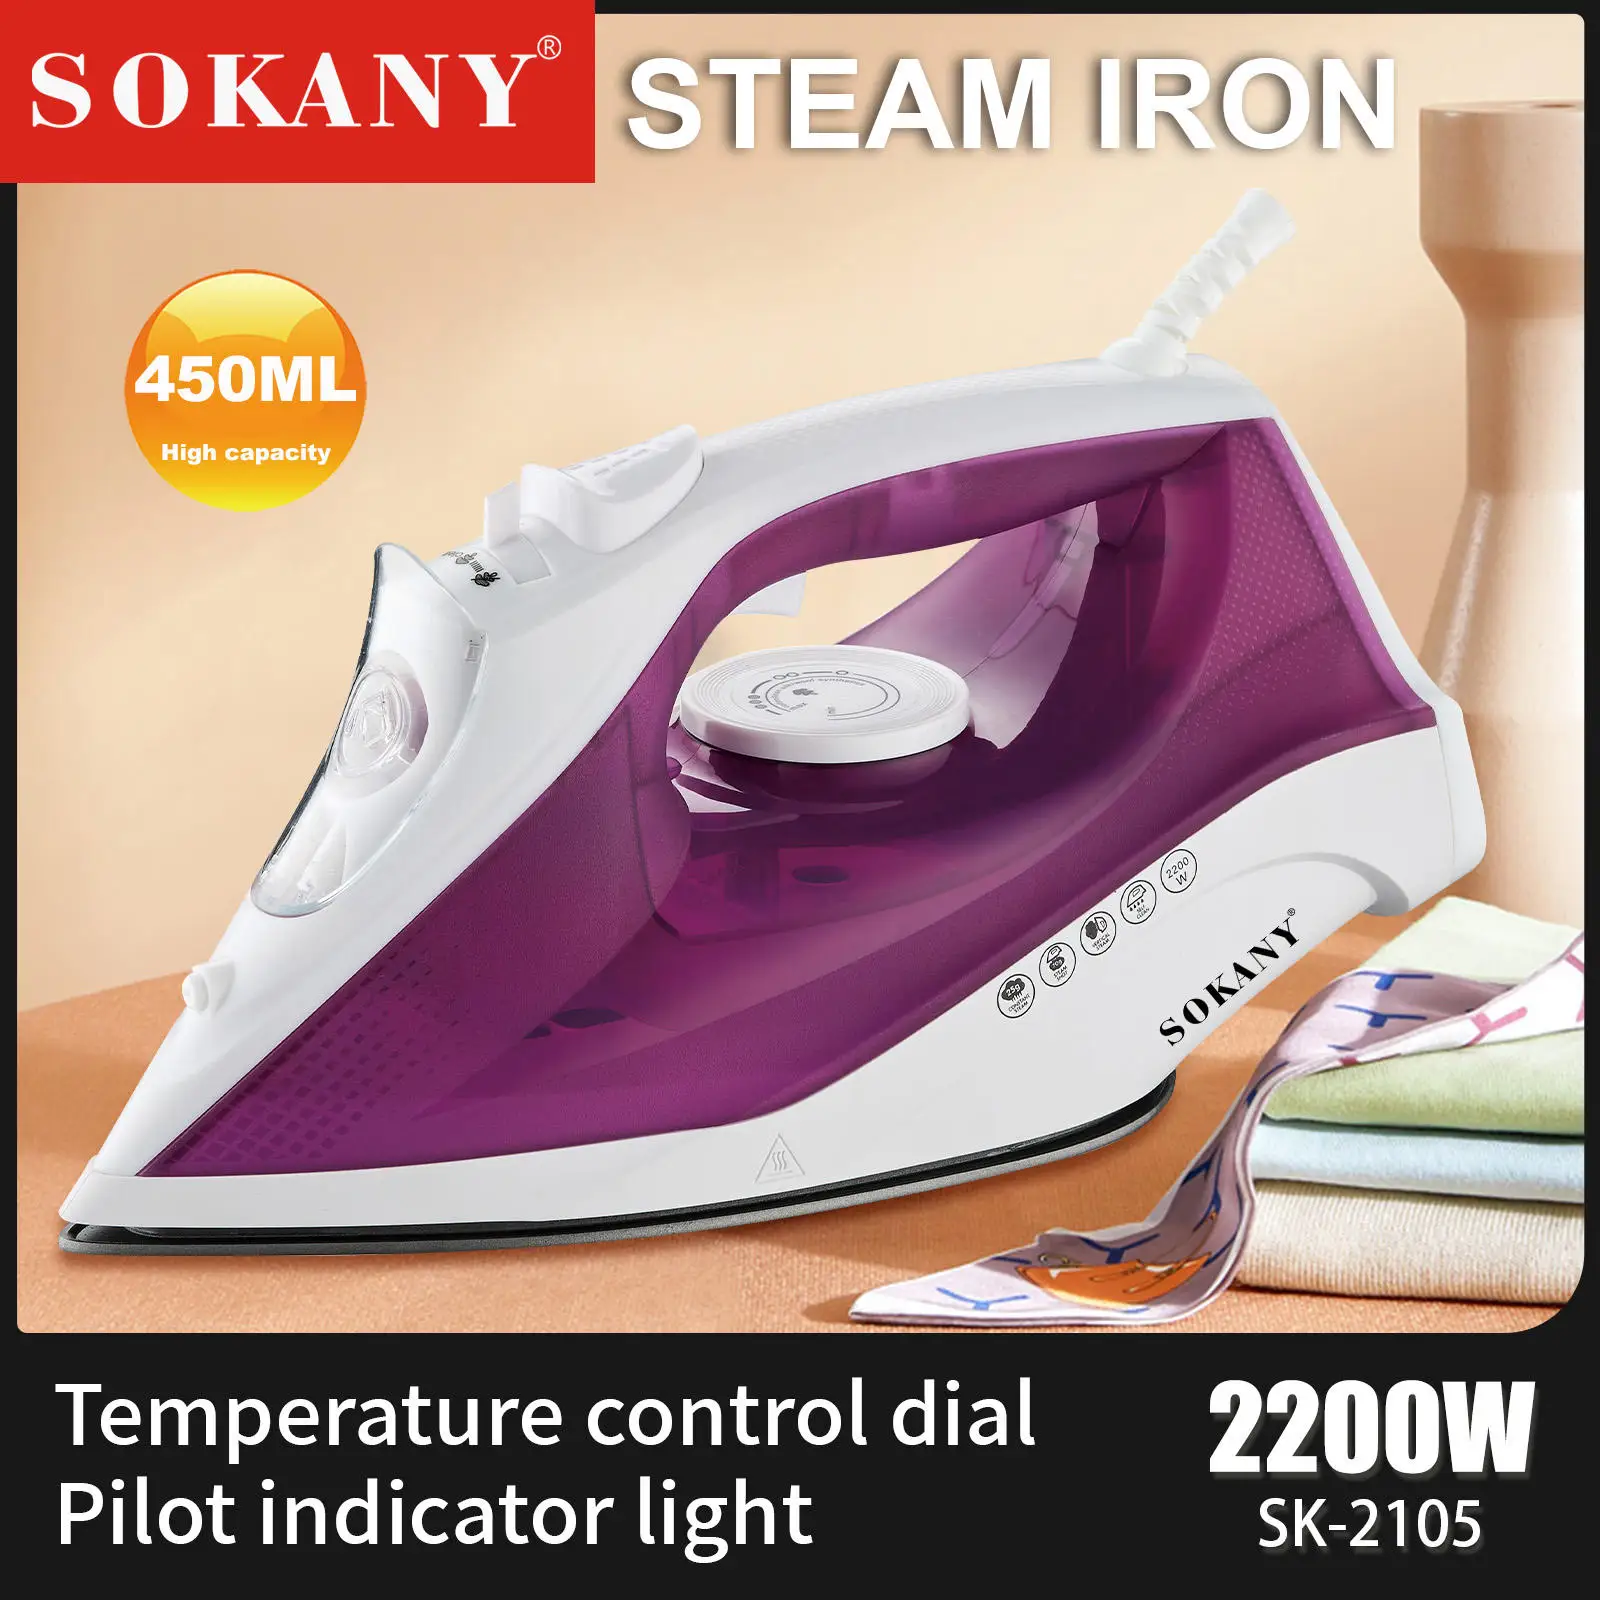 sokany new electric Steam iron portable Steam Multifunction Garment mini industrial machine portable press cordless for laundry